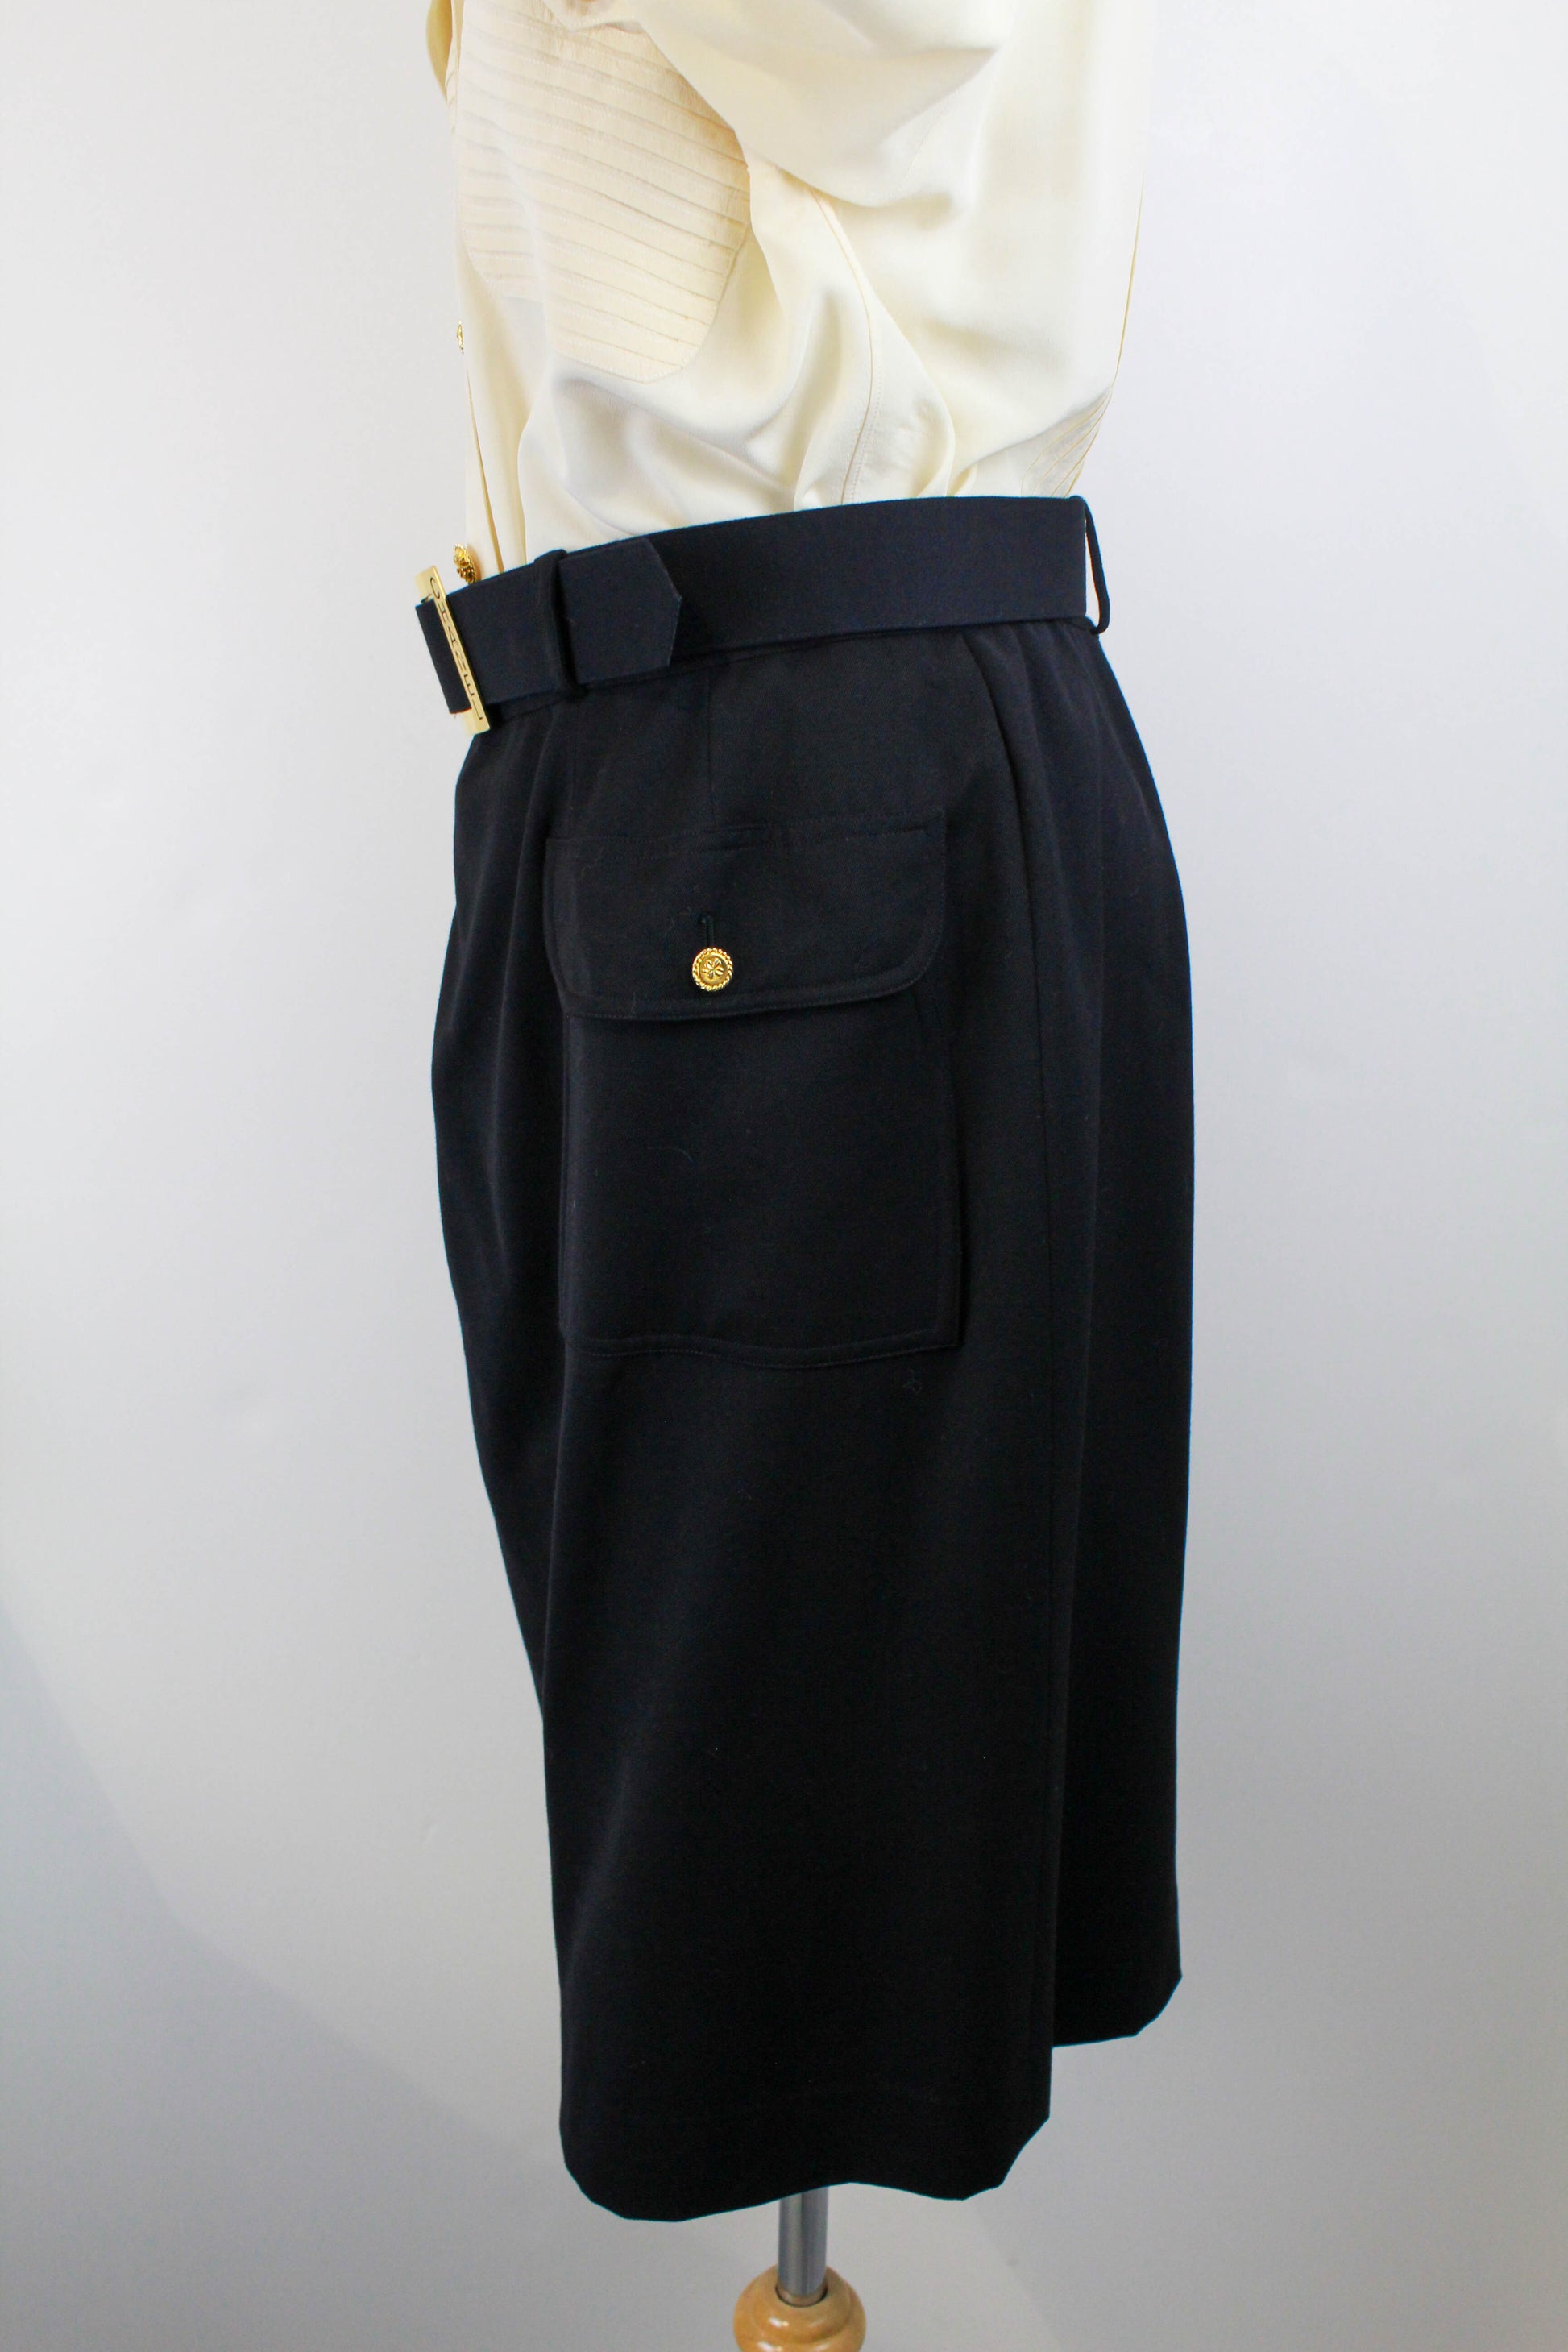 90s Chanel Wool Skirt with Logo Belt